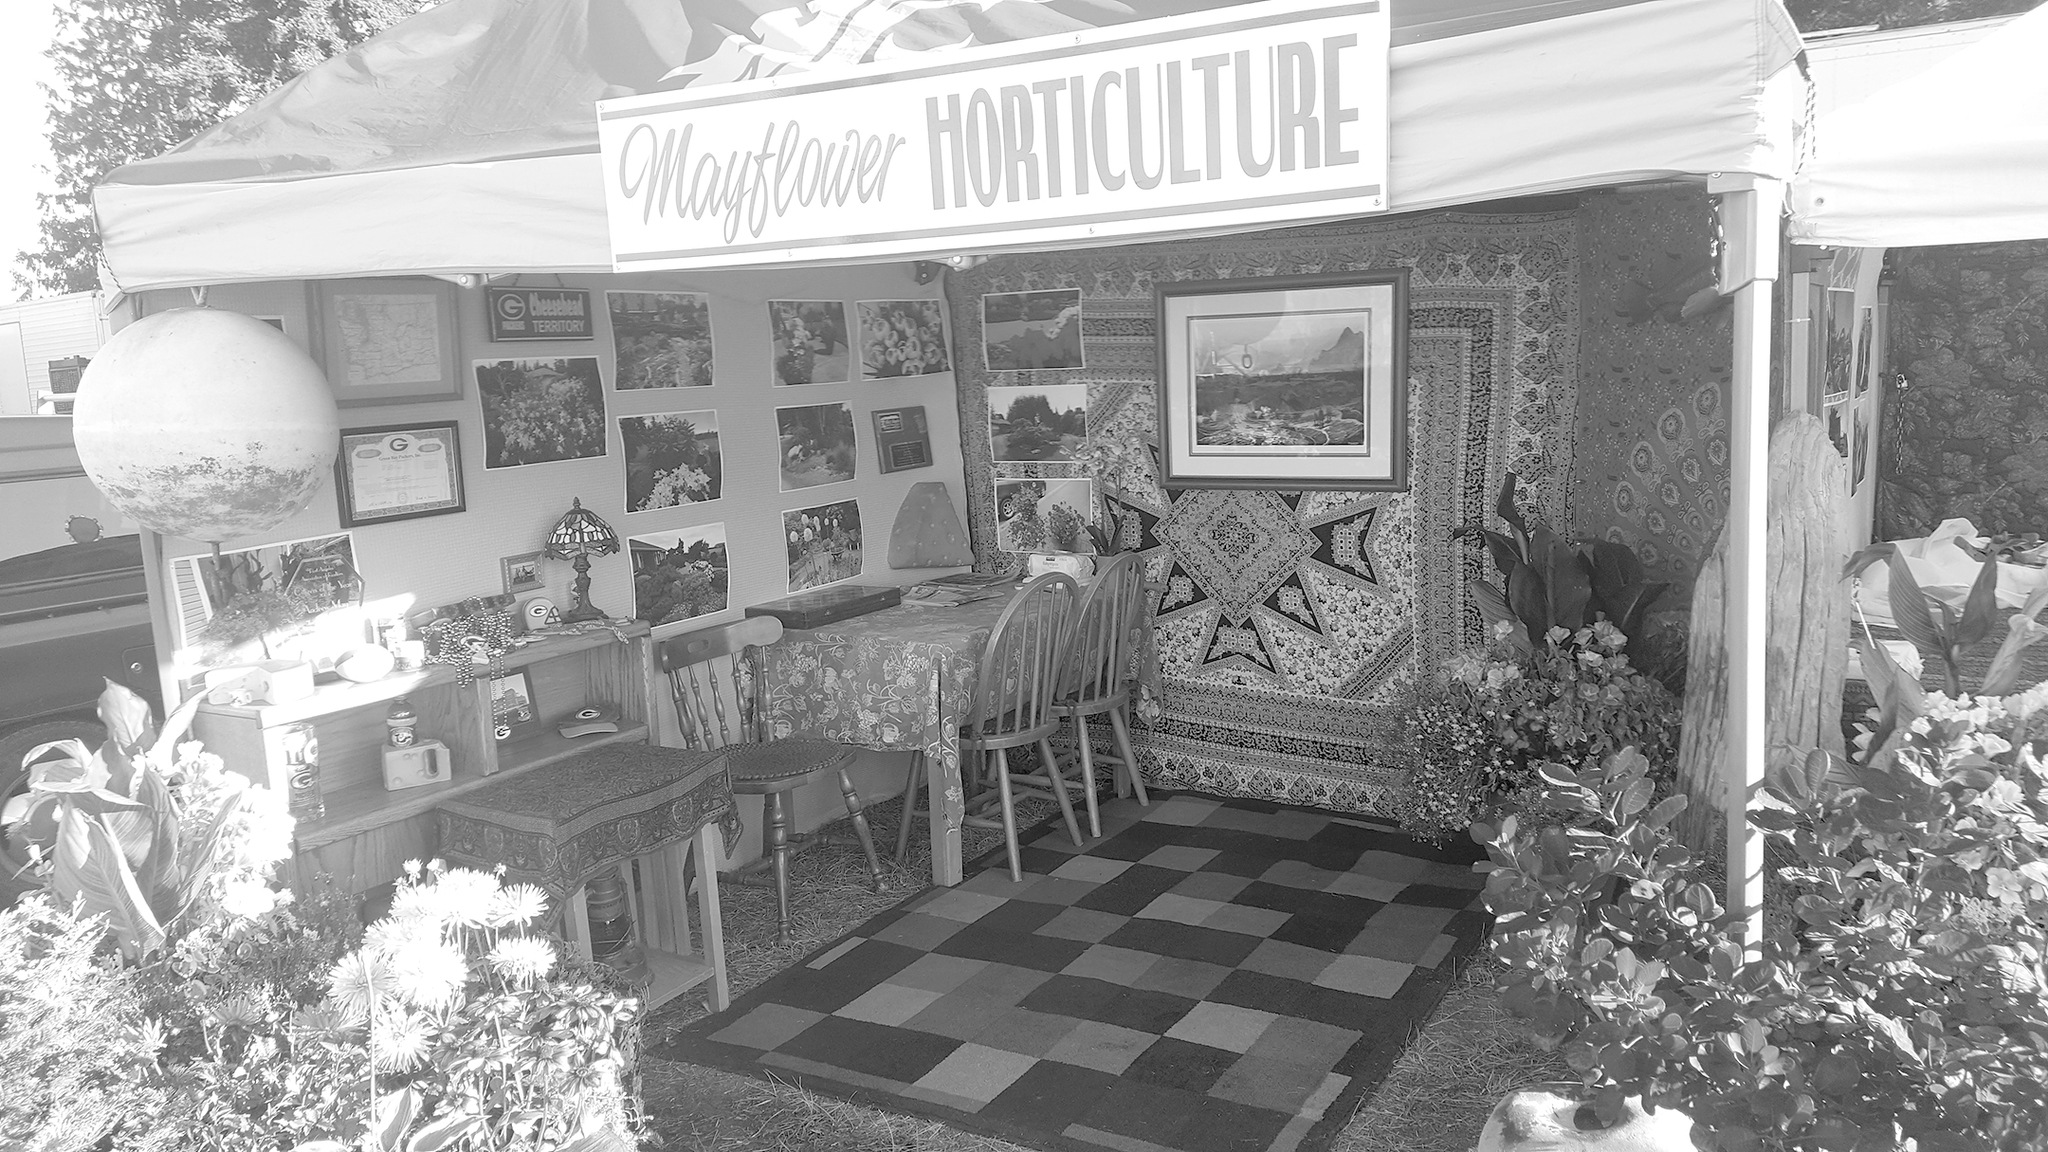 The horticultural booth at the Clallam County Fair.